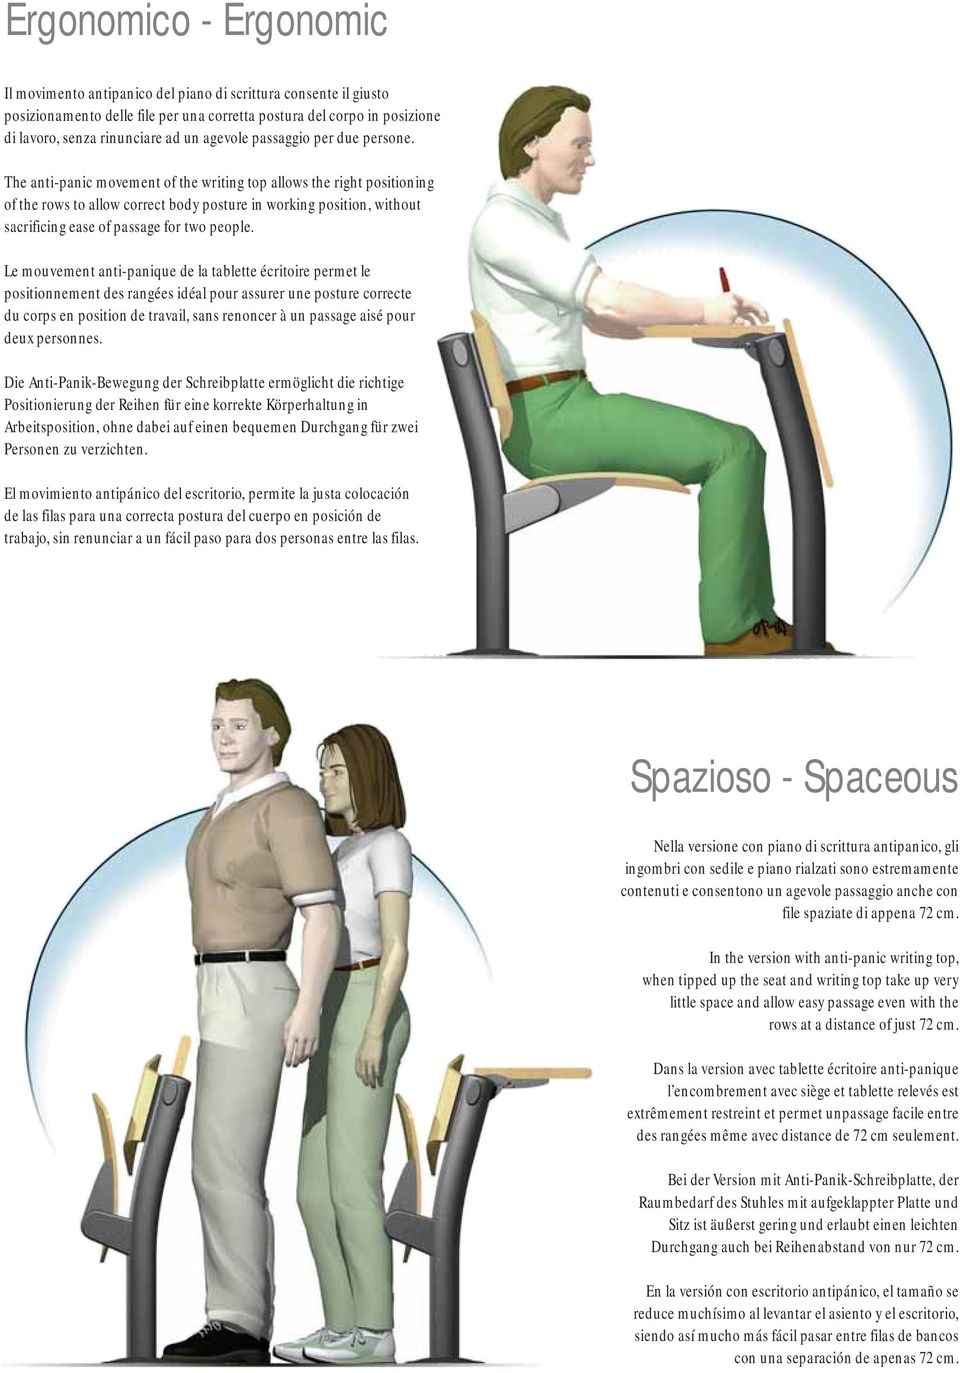 The anti-panic movement of the writing top allows the right positioning of the rows to allow correct body posture in working position, without sacrificing ease of passage for two people.